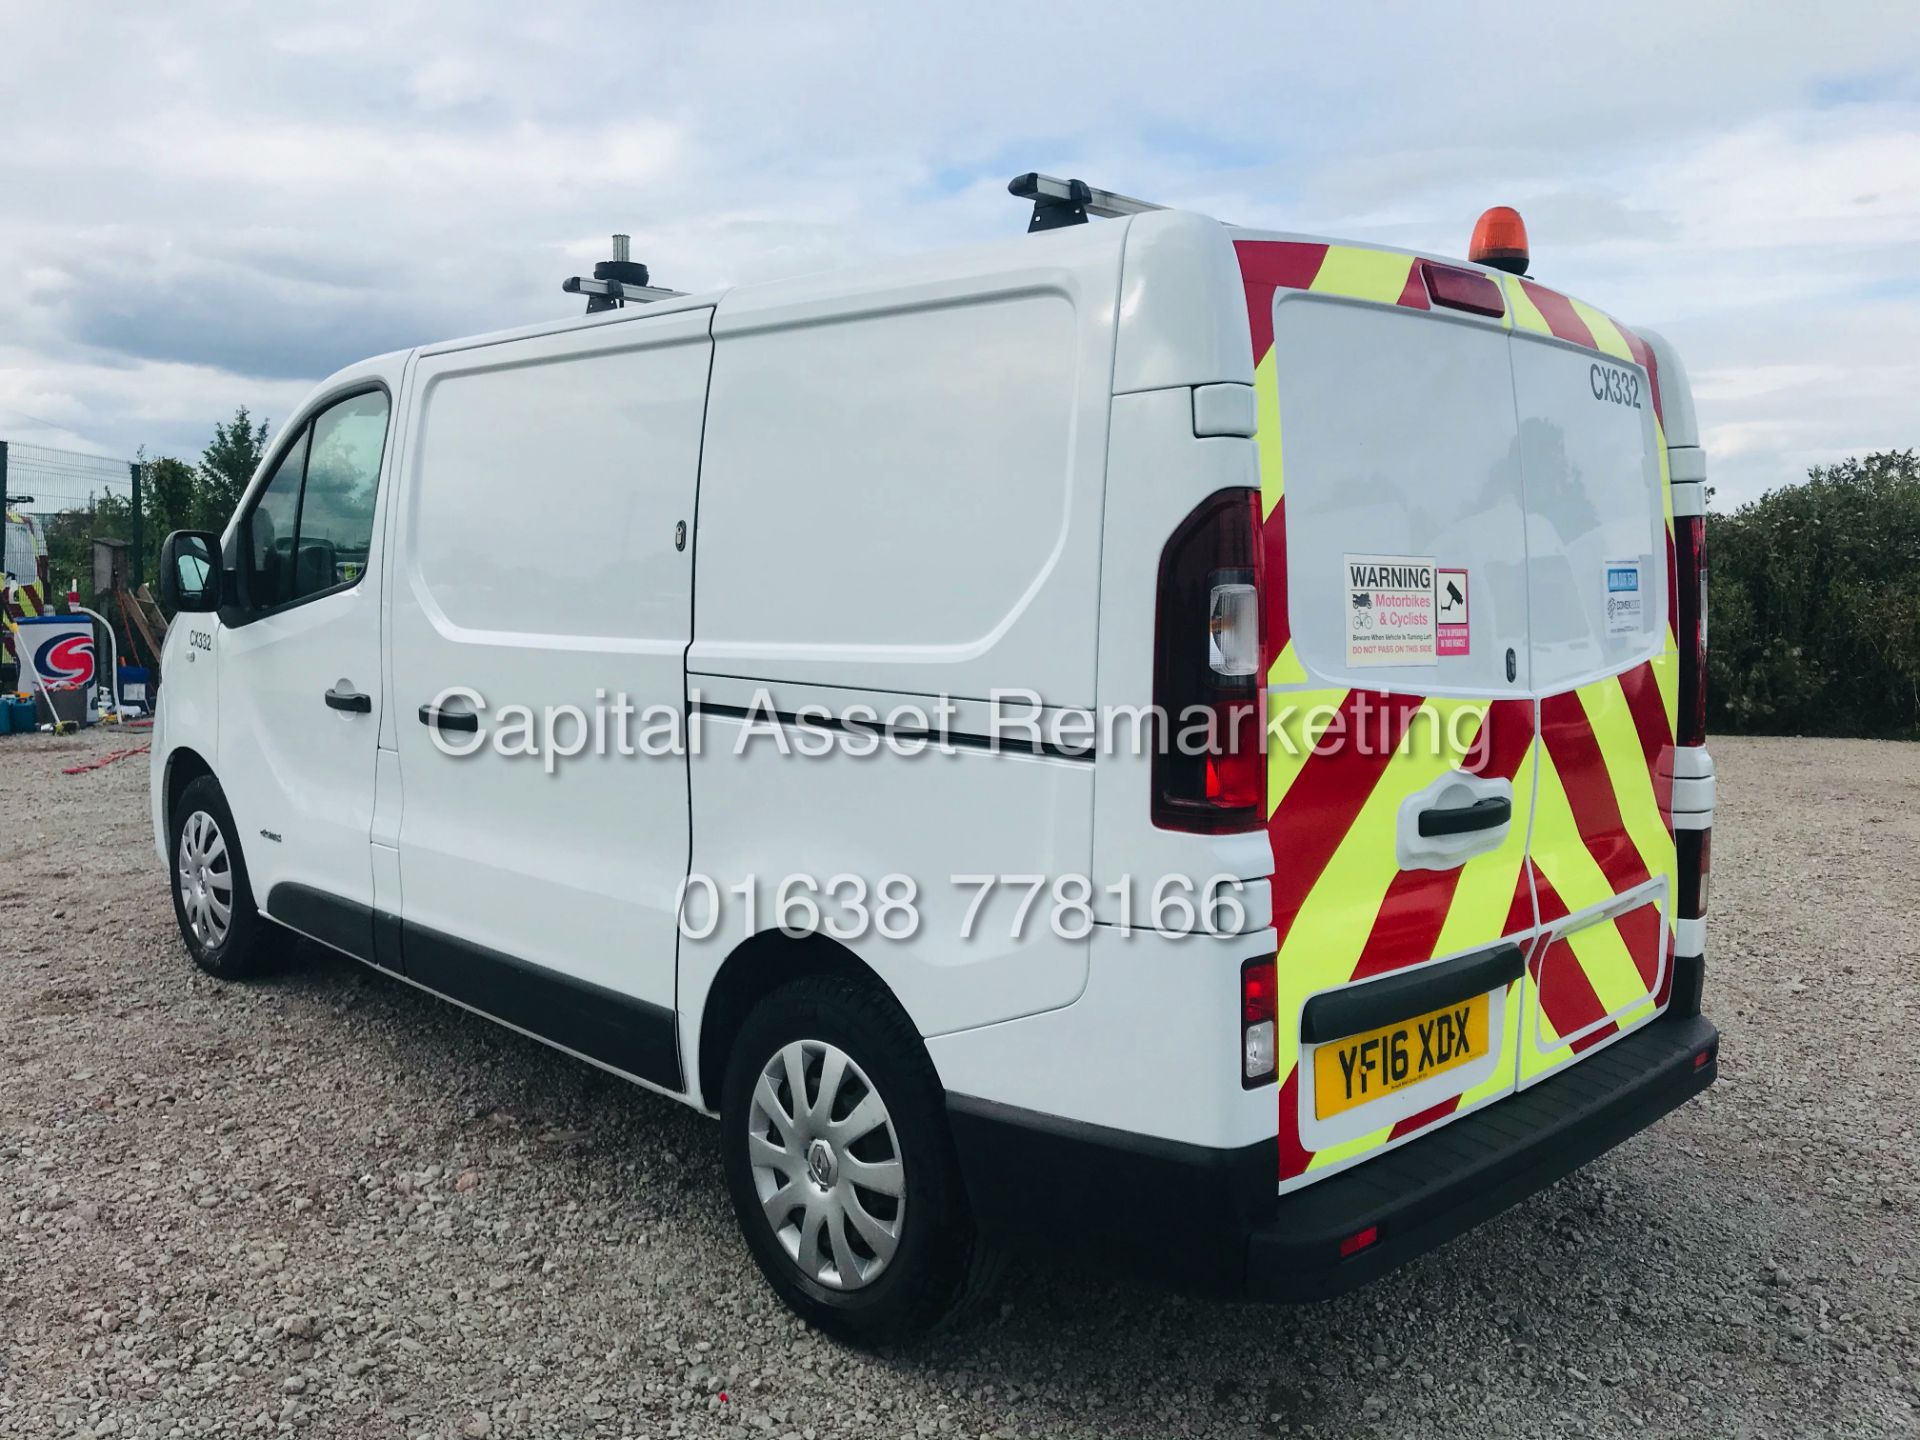 RENAULT TRAFIC 1.6CDTI "BUSINESS EDITION" 1 OWNER *AIR CON* ELEC PACK - LOW MILEAGE *LOOK* - Image 9 of 21